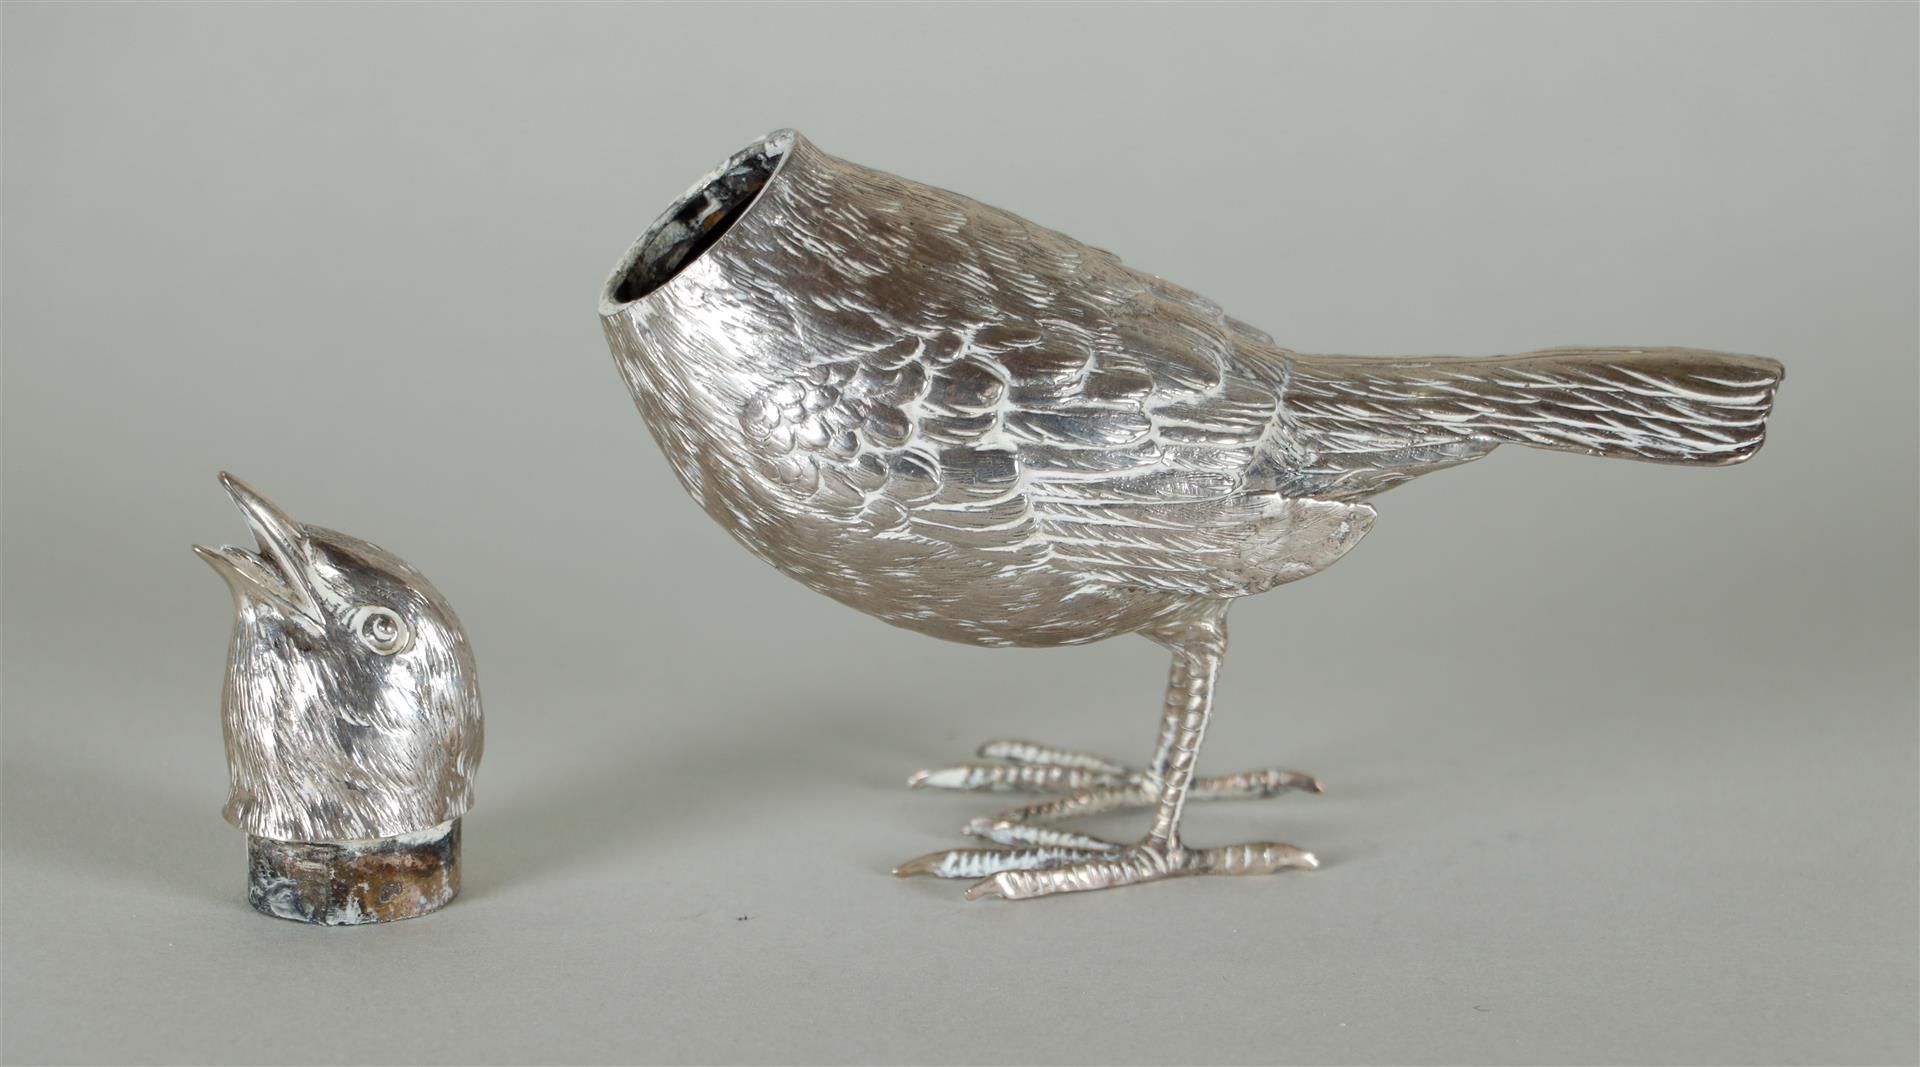 Silver table piece / spreader in the shape of a thrush - Image 7 of 7